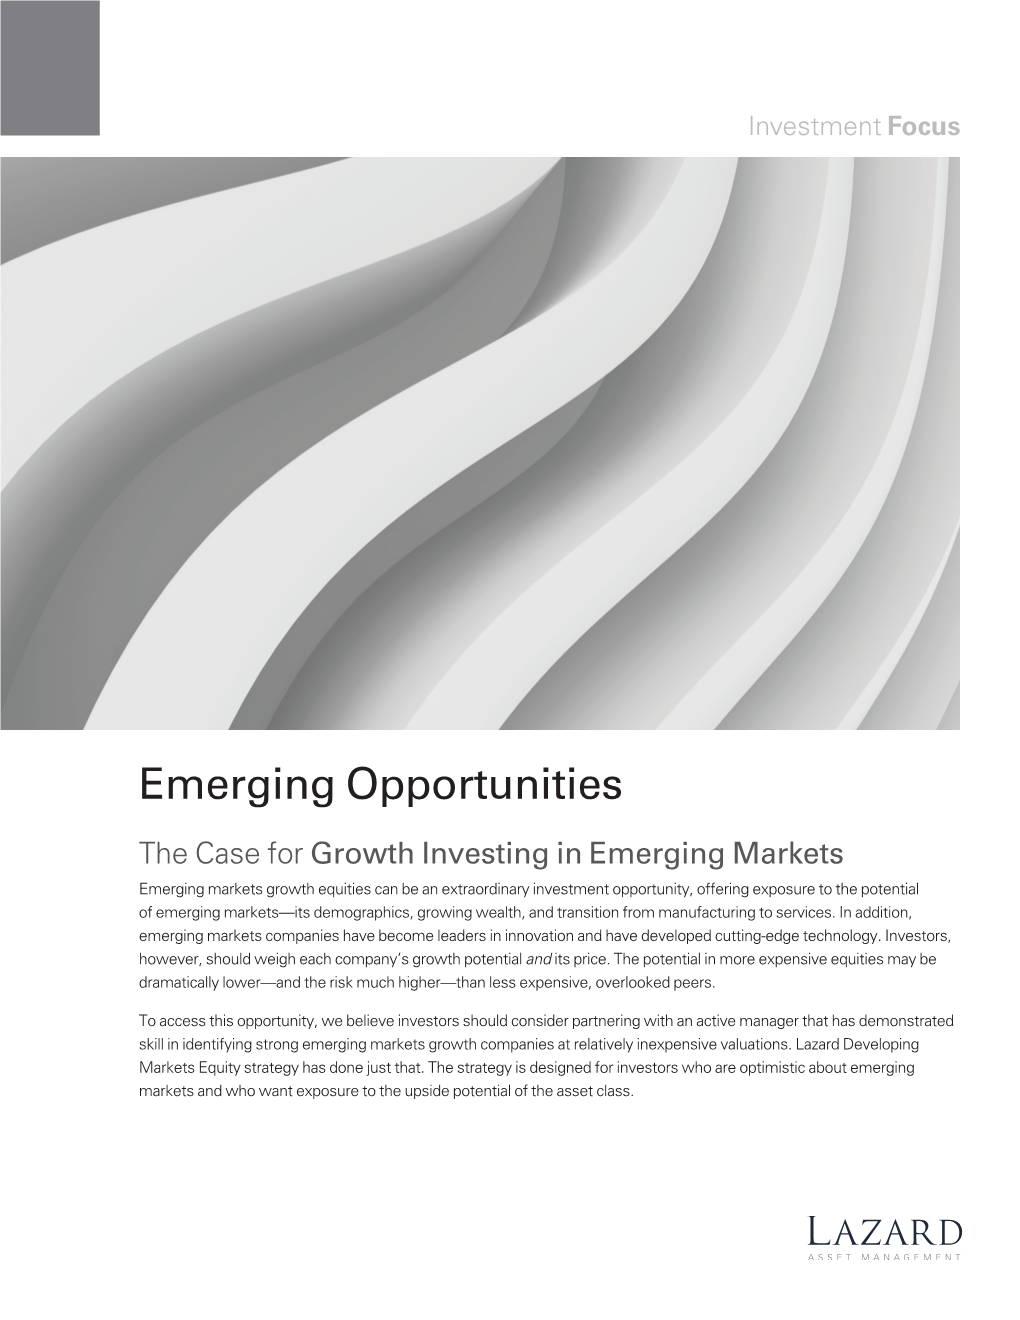 The Case for Growth Investing in Emerging Markets